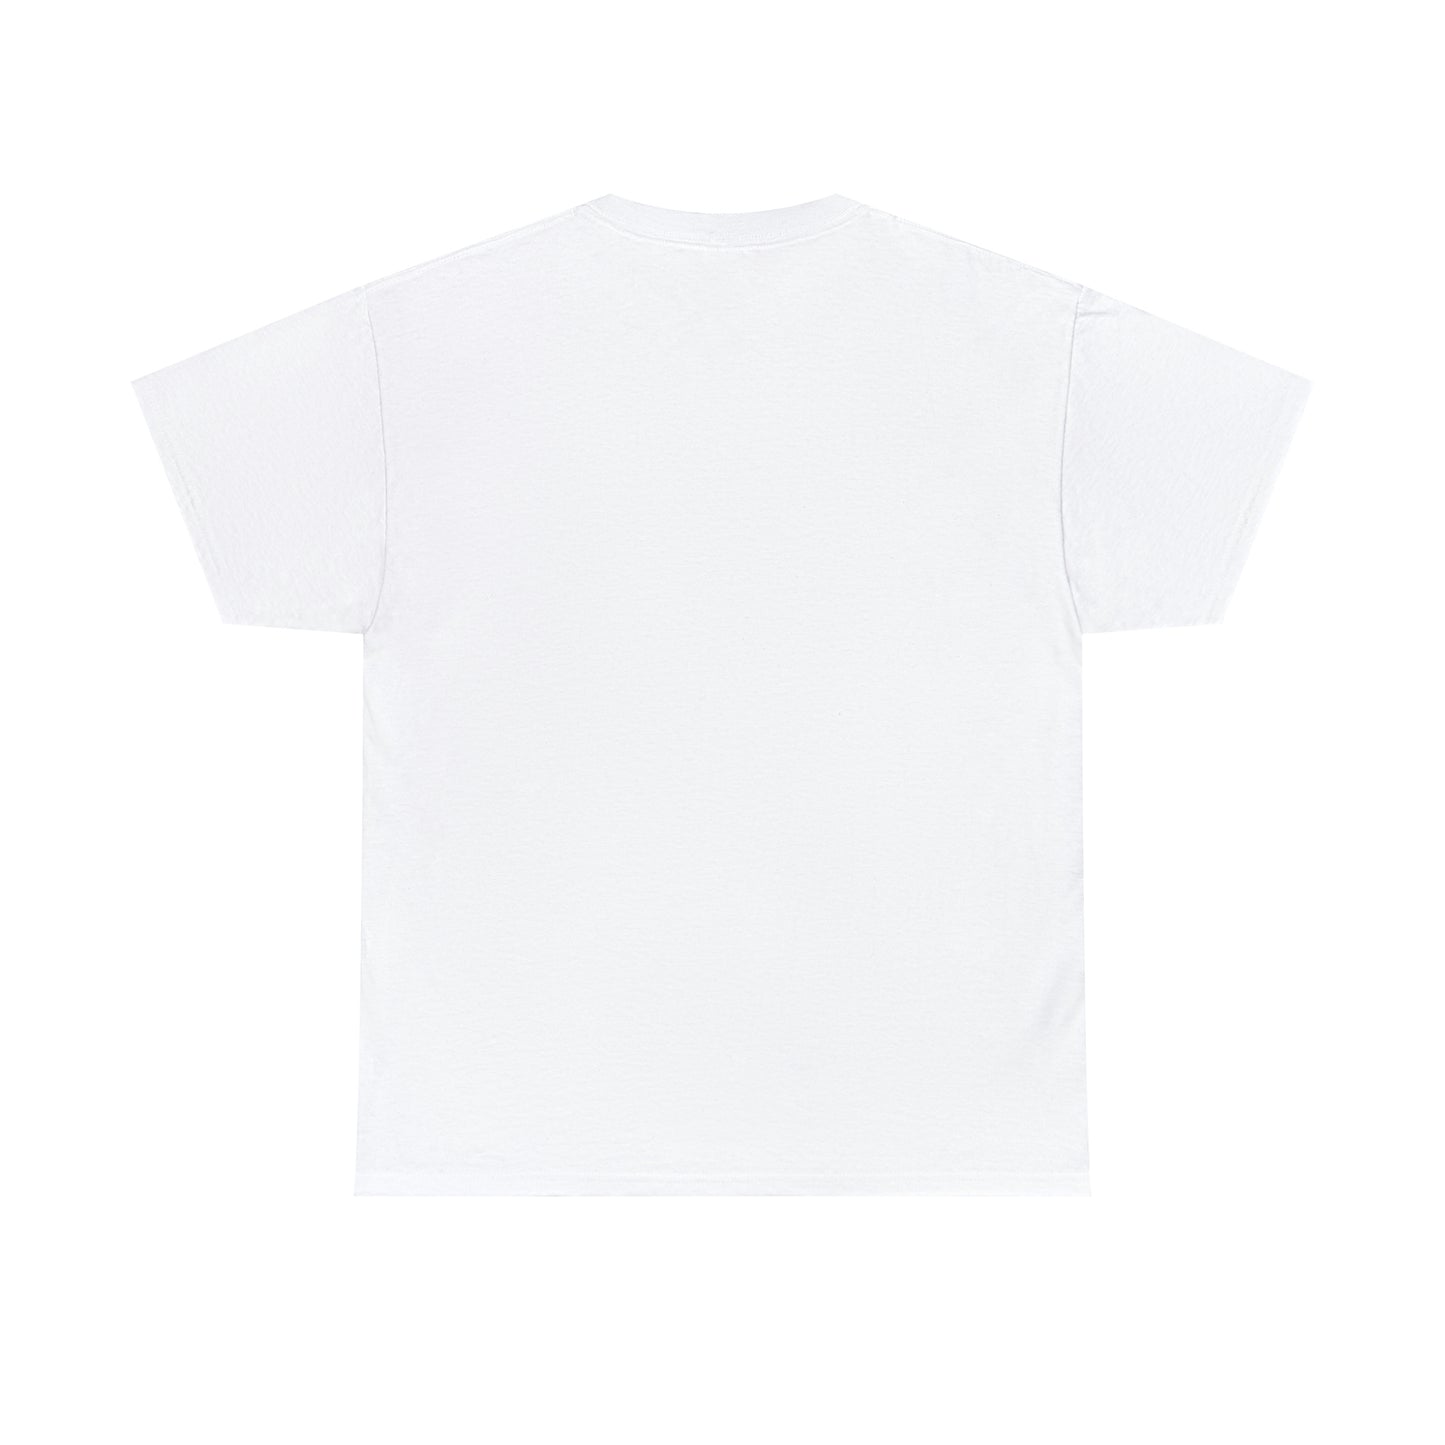 Flat back view of the white t-shirt